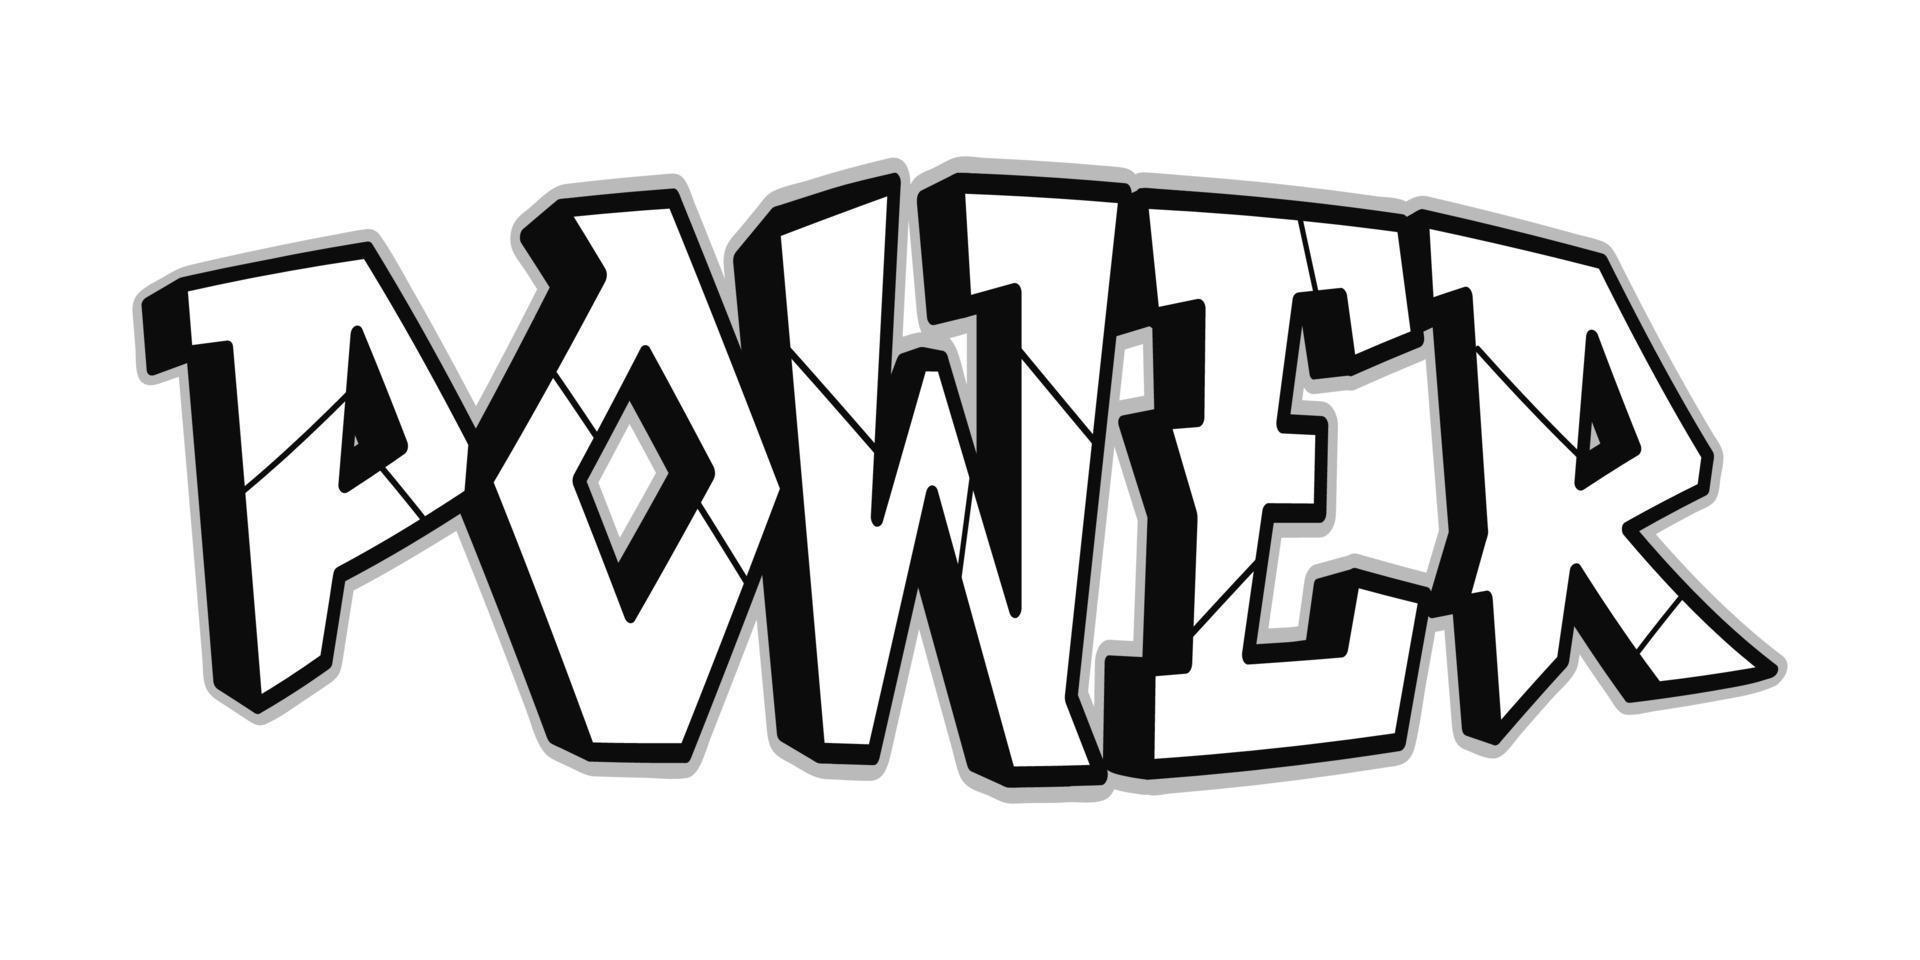 Power word graffiti style letters.Vector hand drawn doodle cartoon logo illustration. Funny cool Power letters, fashion, graffiti style print for t-shirt, poster concept vector